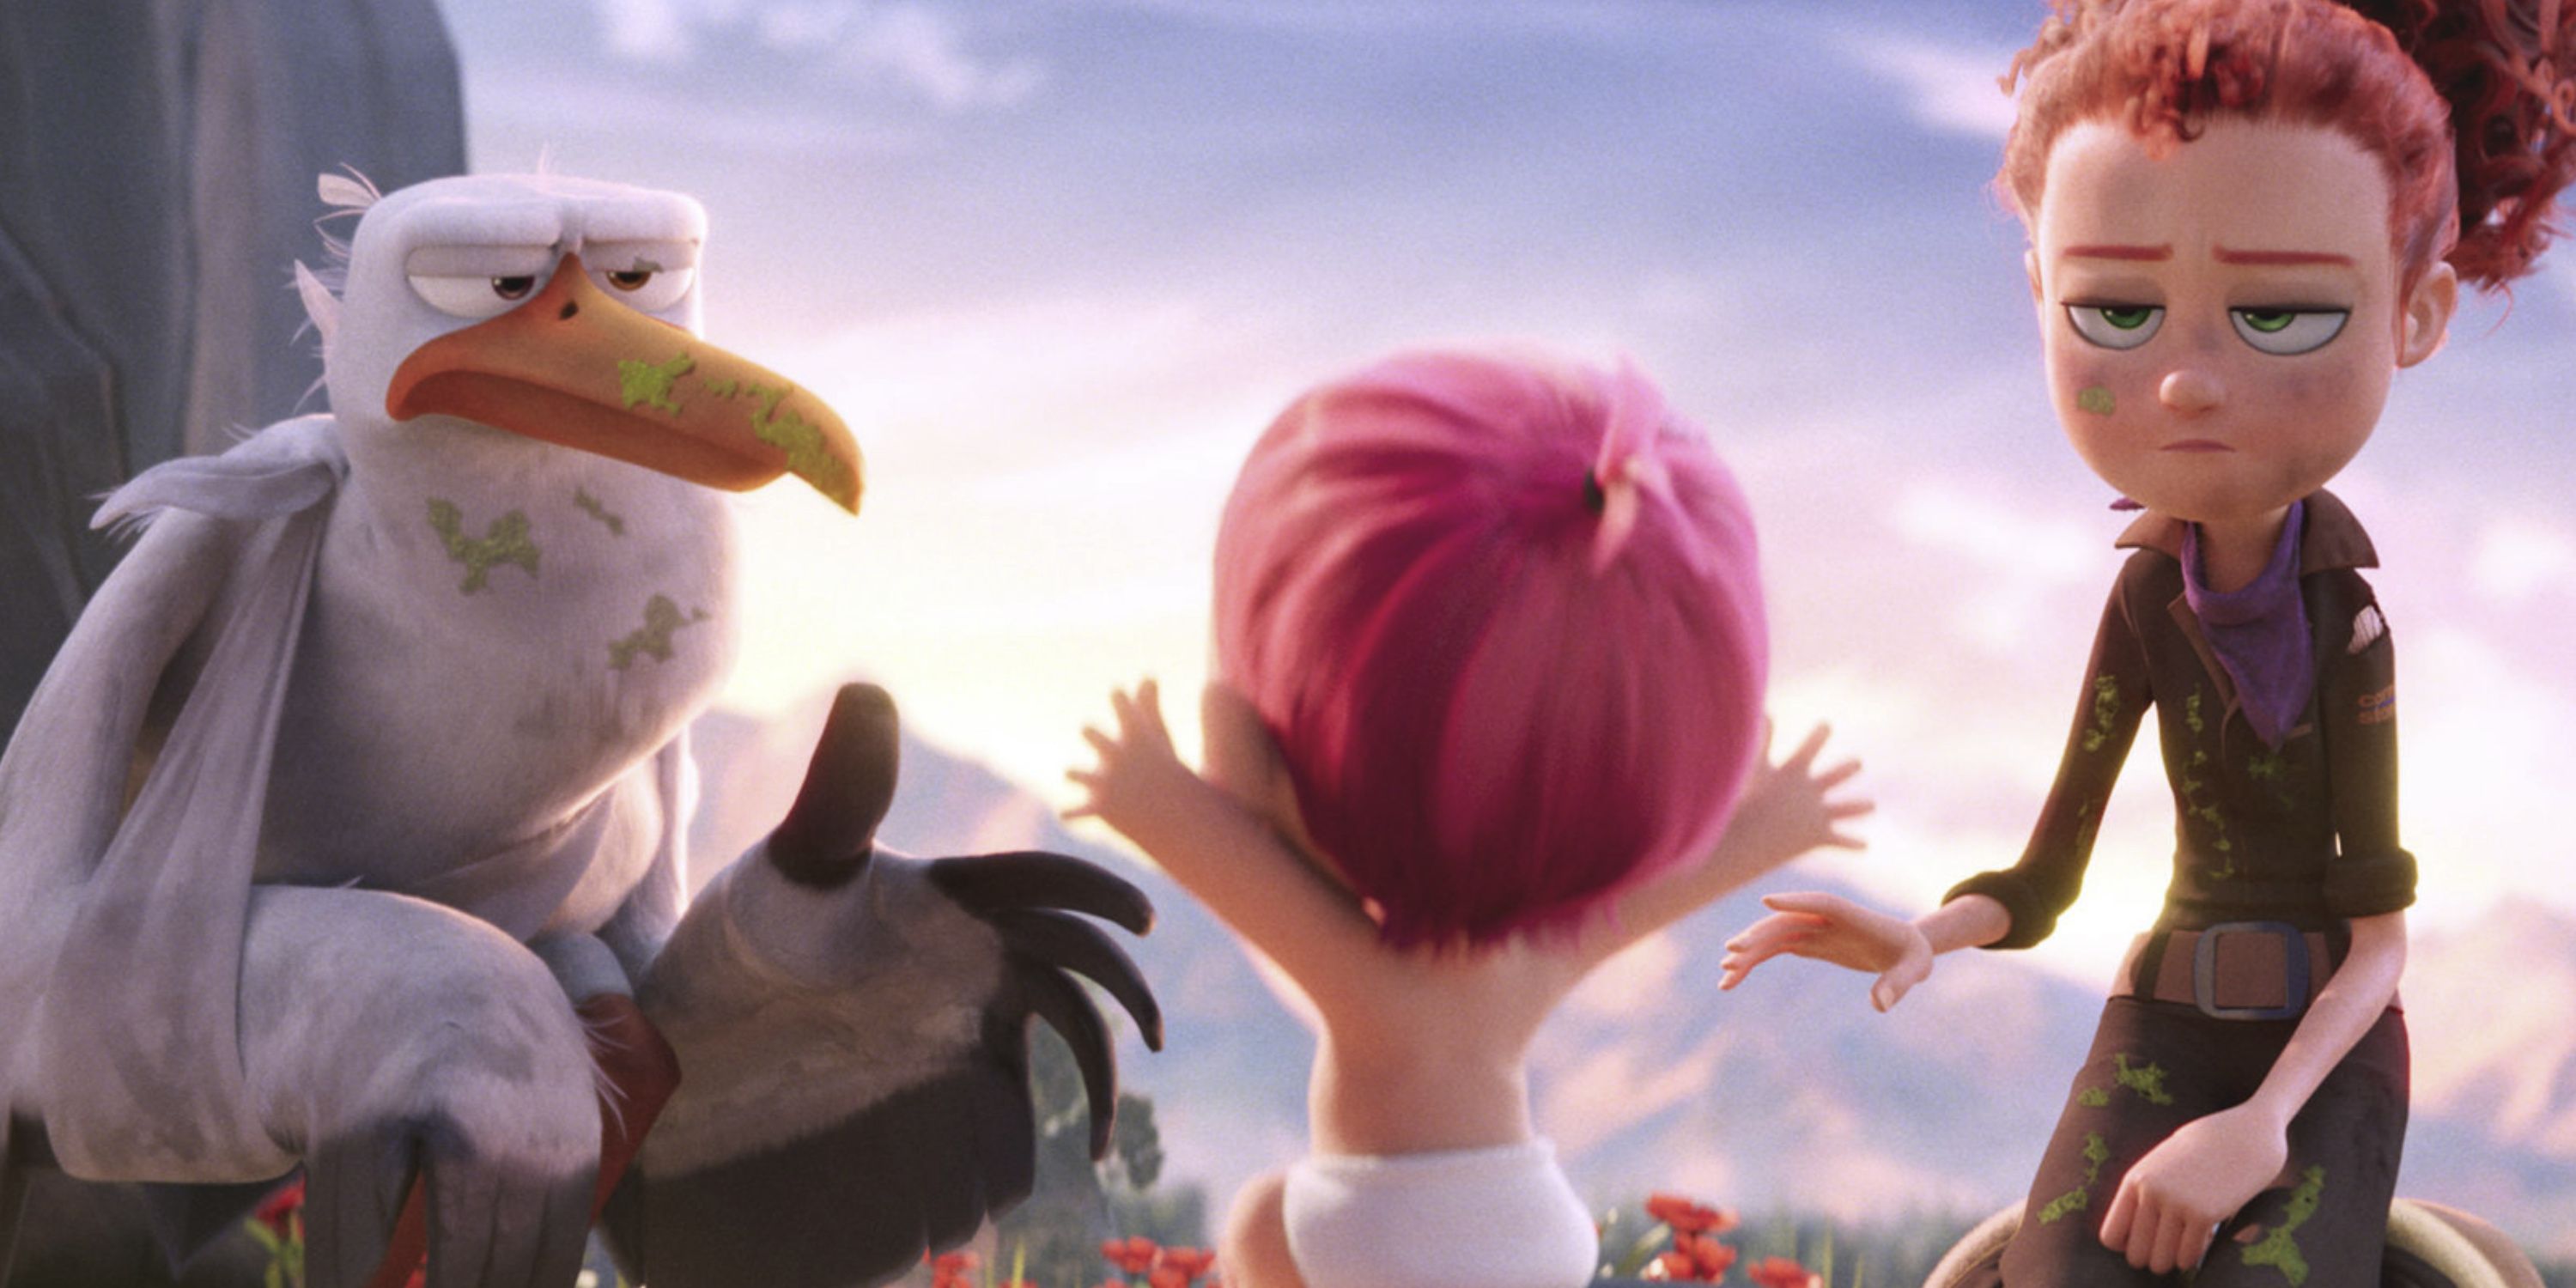 A stork and a woman look unenthusiastically at a baby in Storks